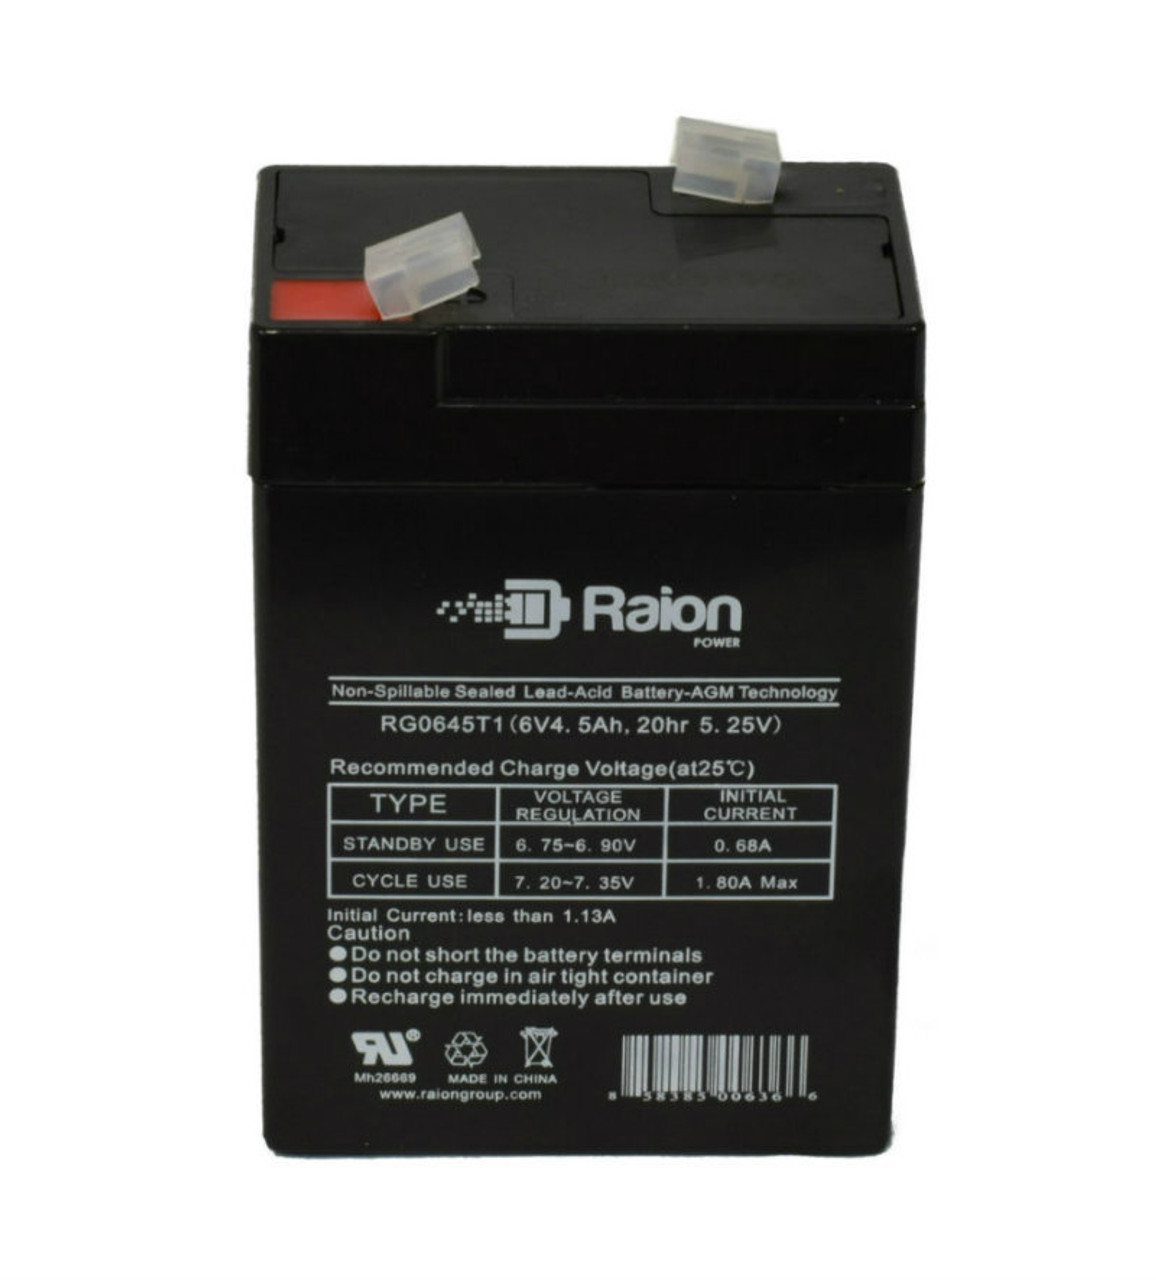 Raion Power RG0645T1 Replacement Battery Cartridge for Light Alarms RSQG